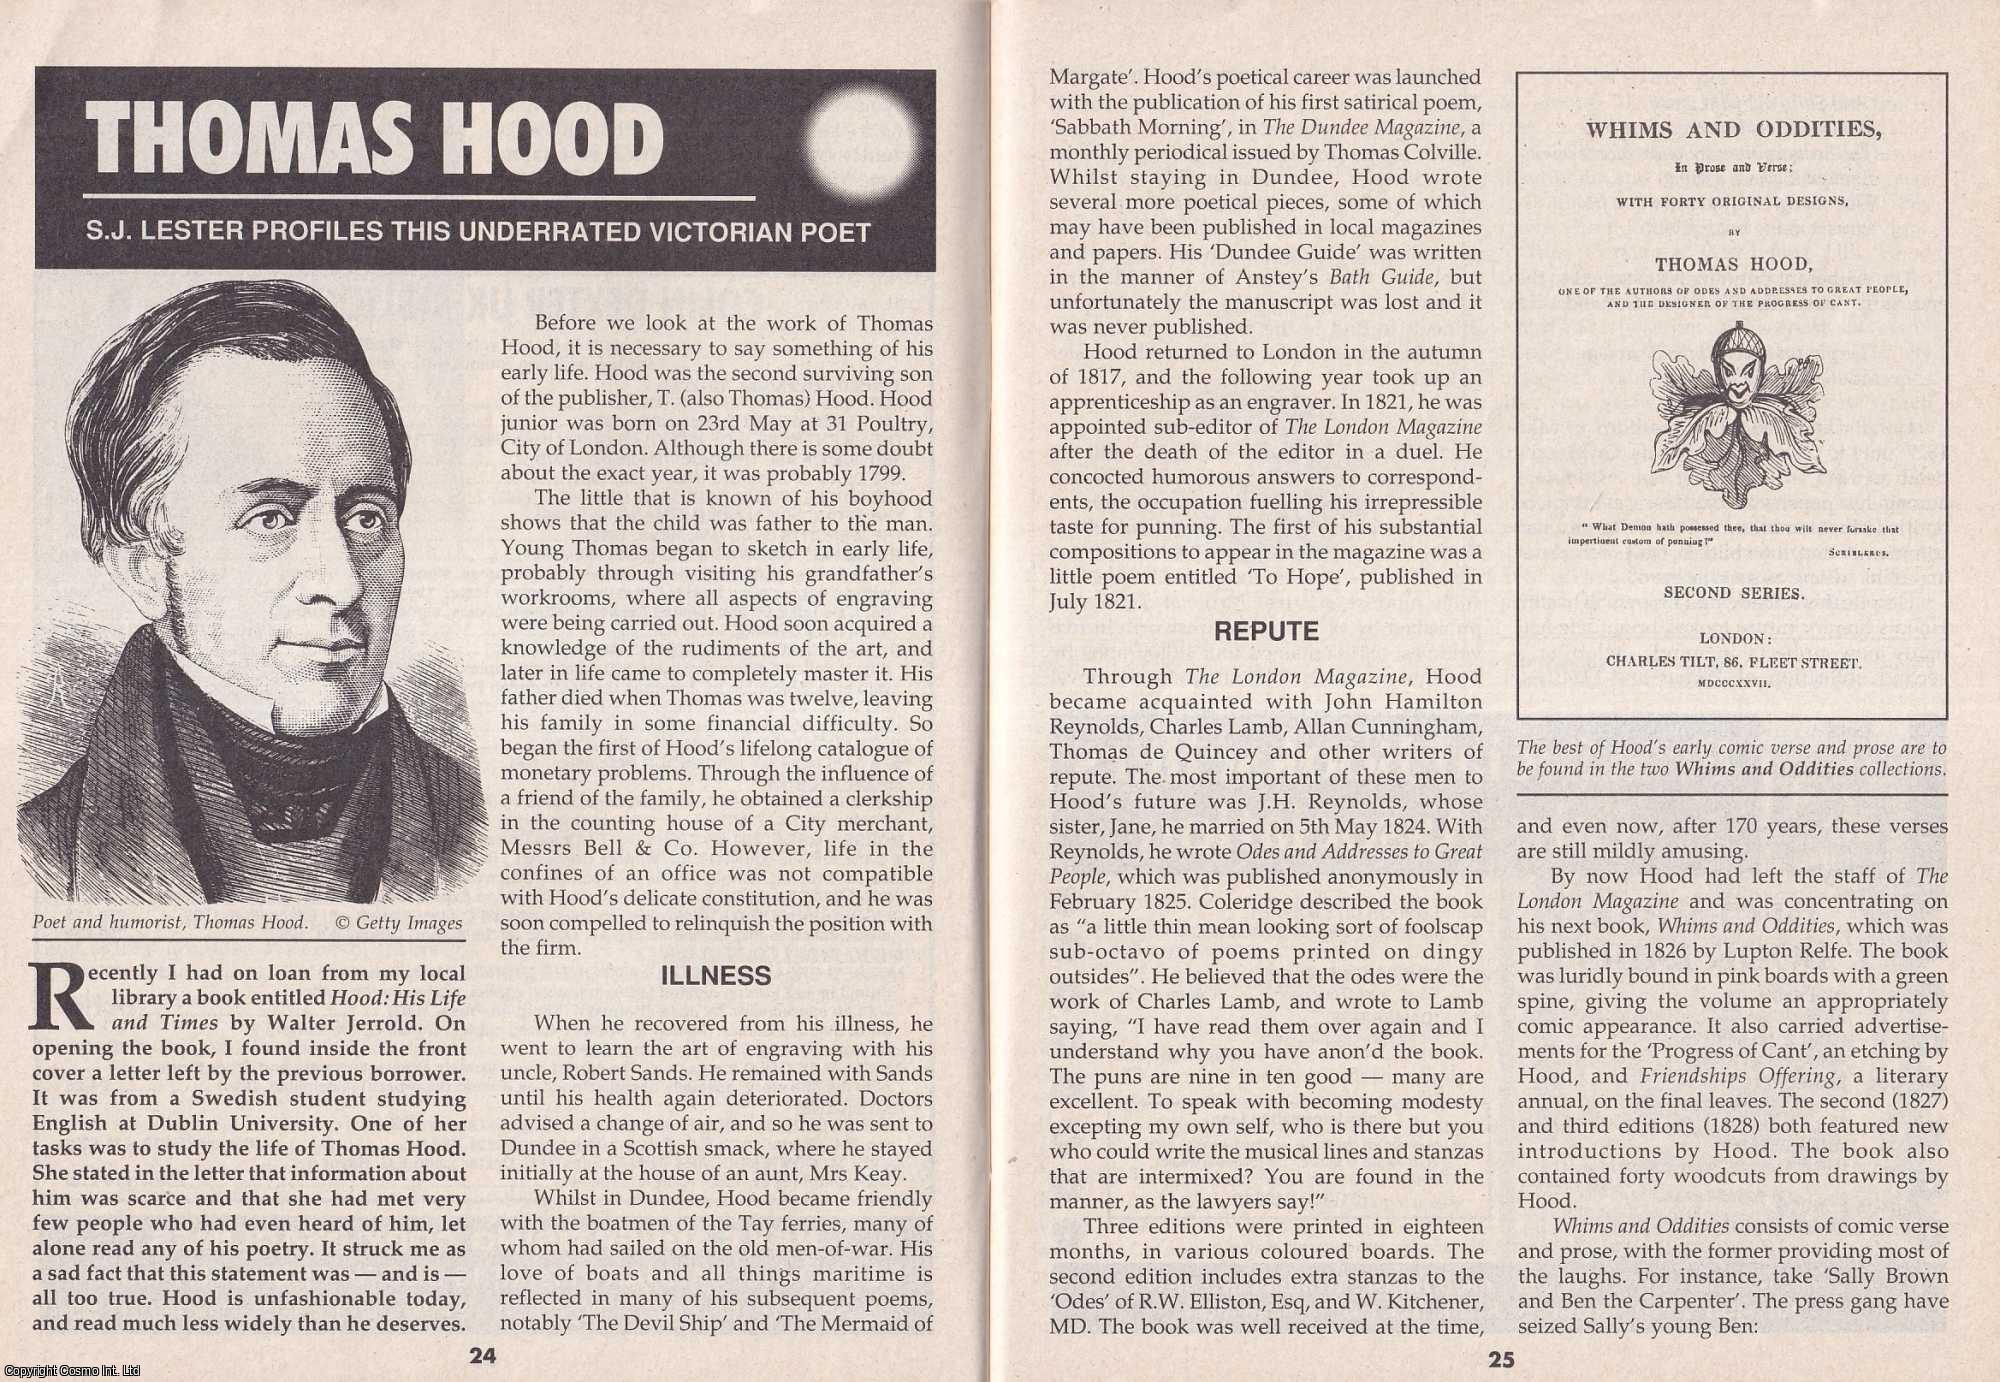 S. J. Lester - Thomas Hood : Underrated Victorian Poet. This is an original article separated from an issue of The Book & Magazine Collector publication, 1997.